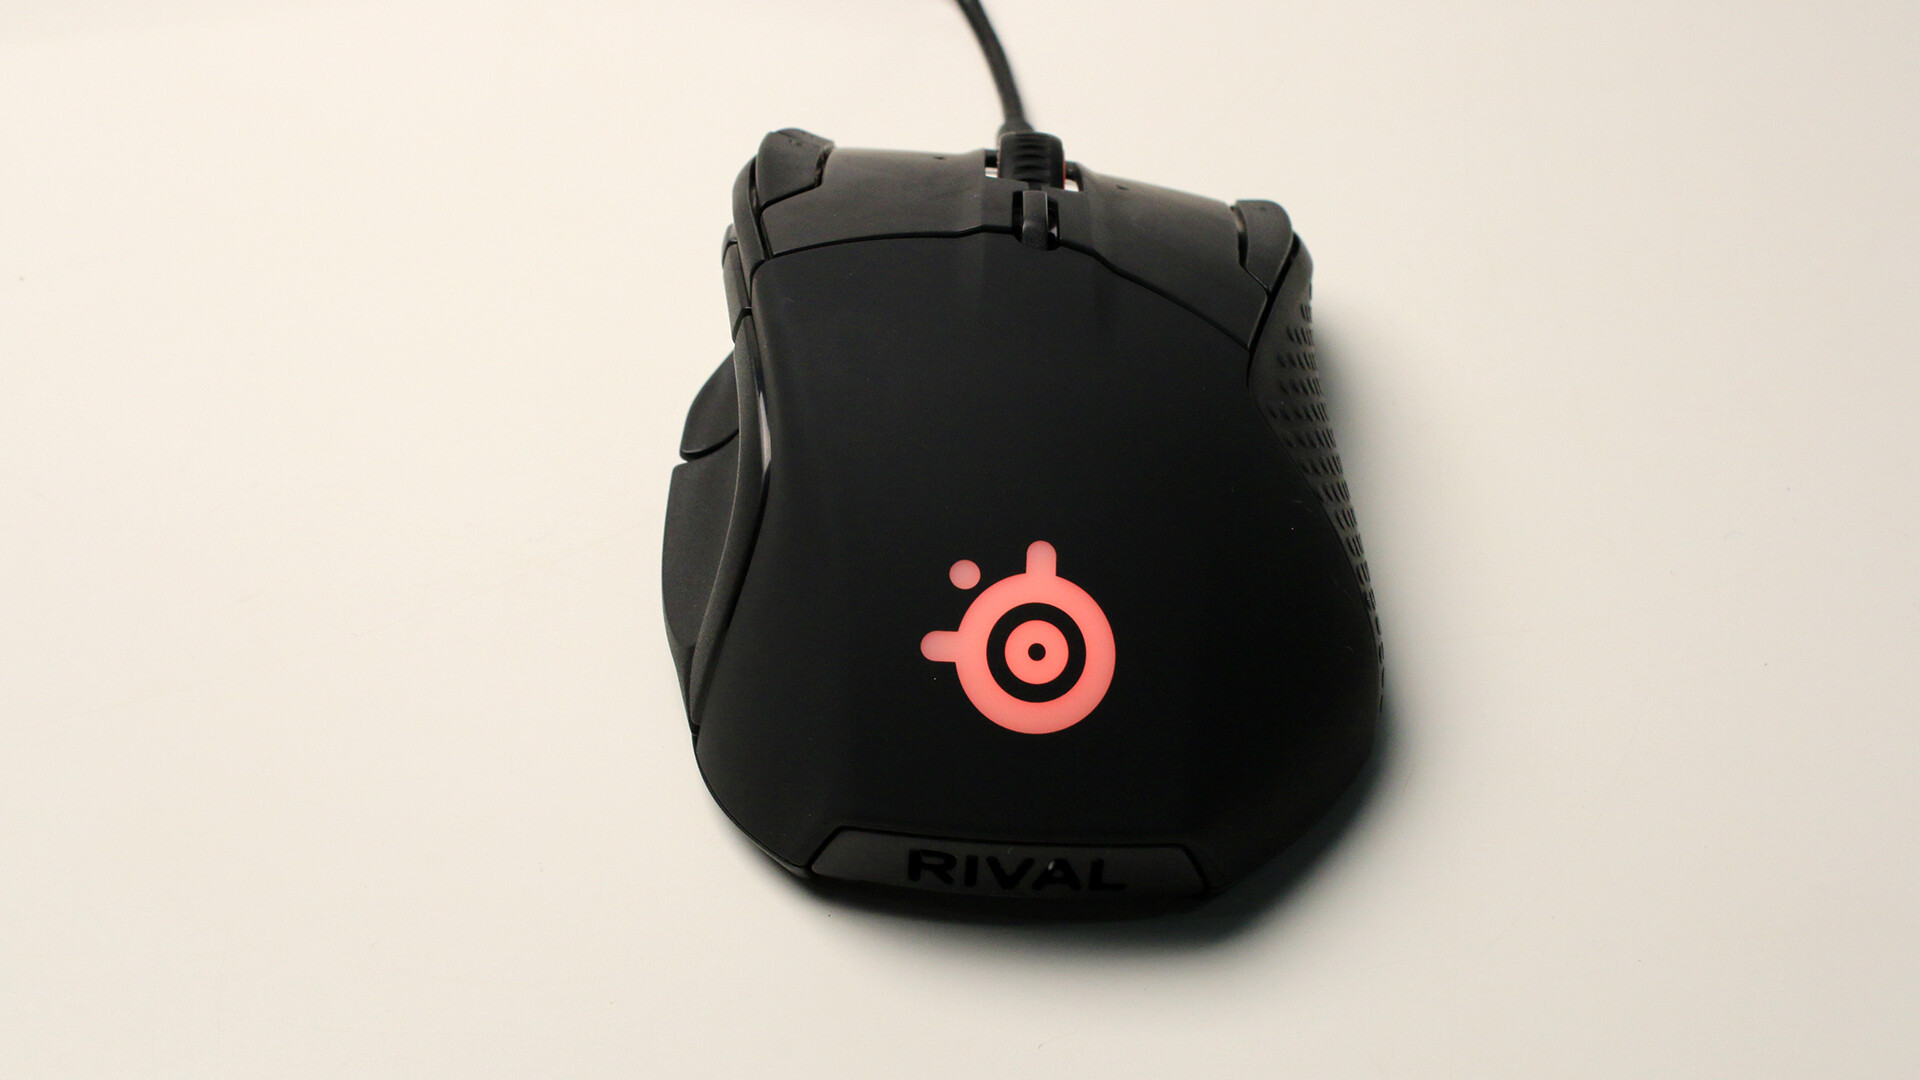 Steelseries Rival 500 Gaming Mouse (Hardware) Review 2